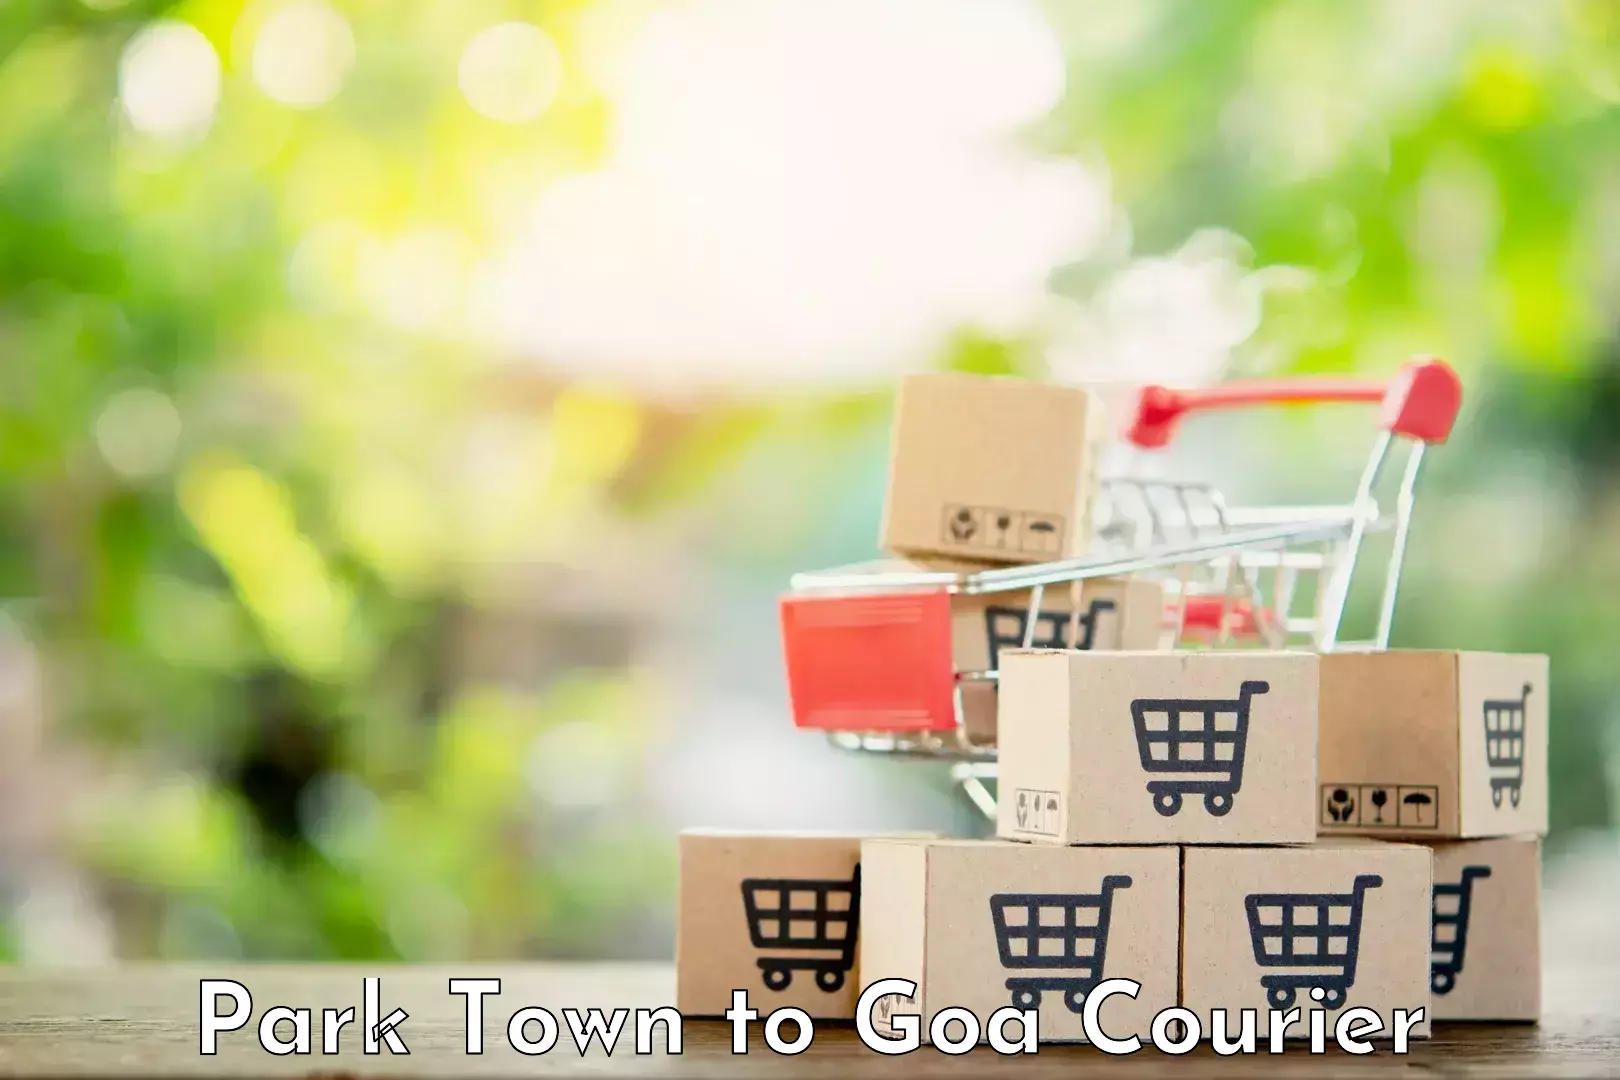 Online shipping calculator Park Town to South Goa